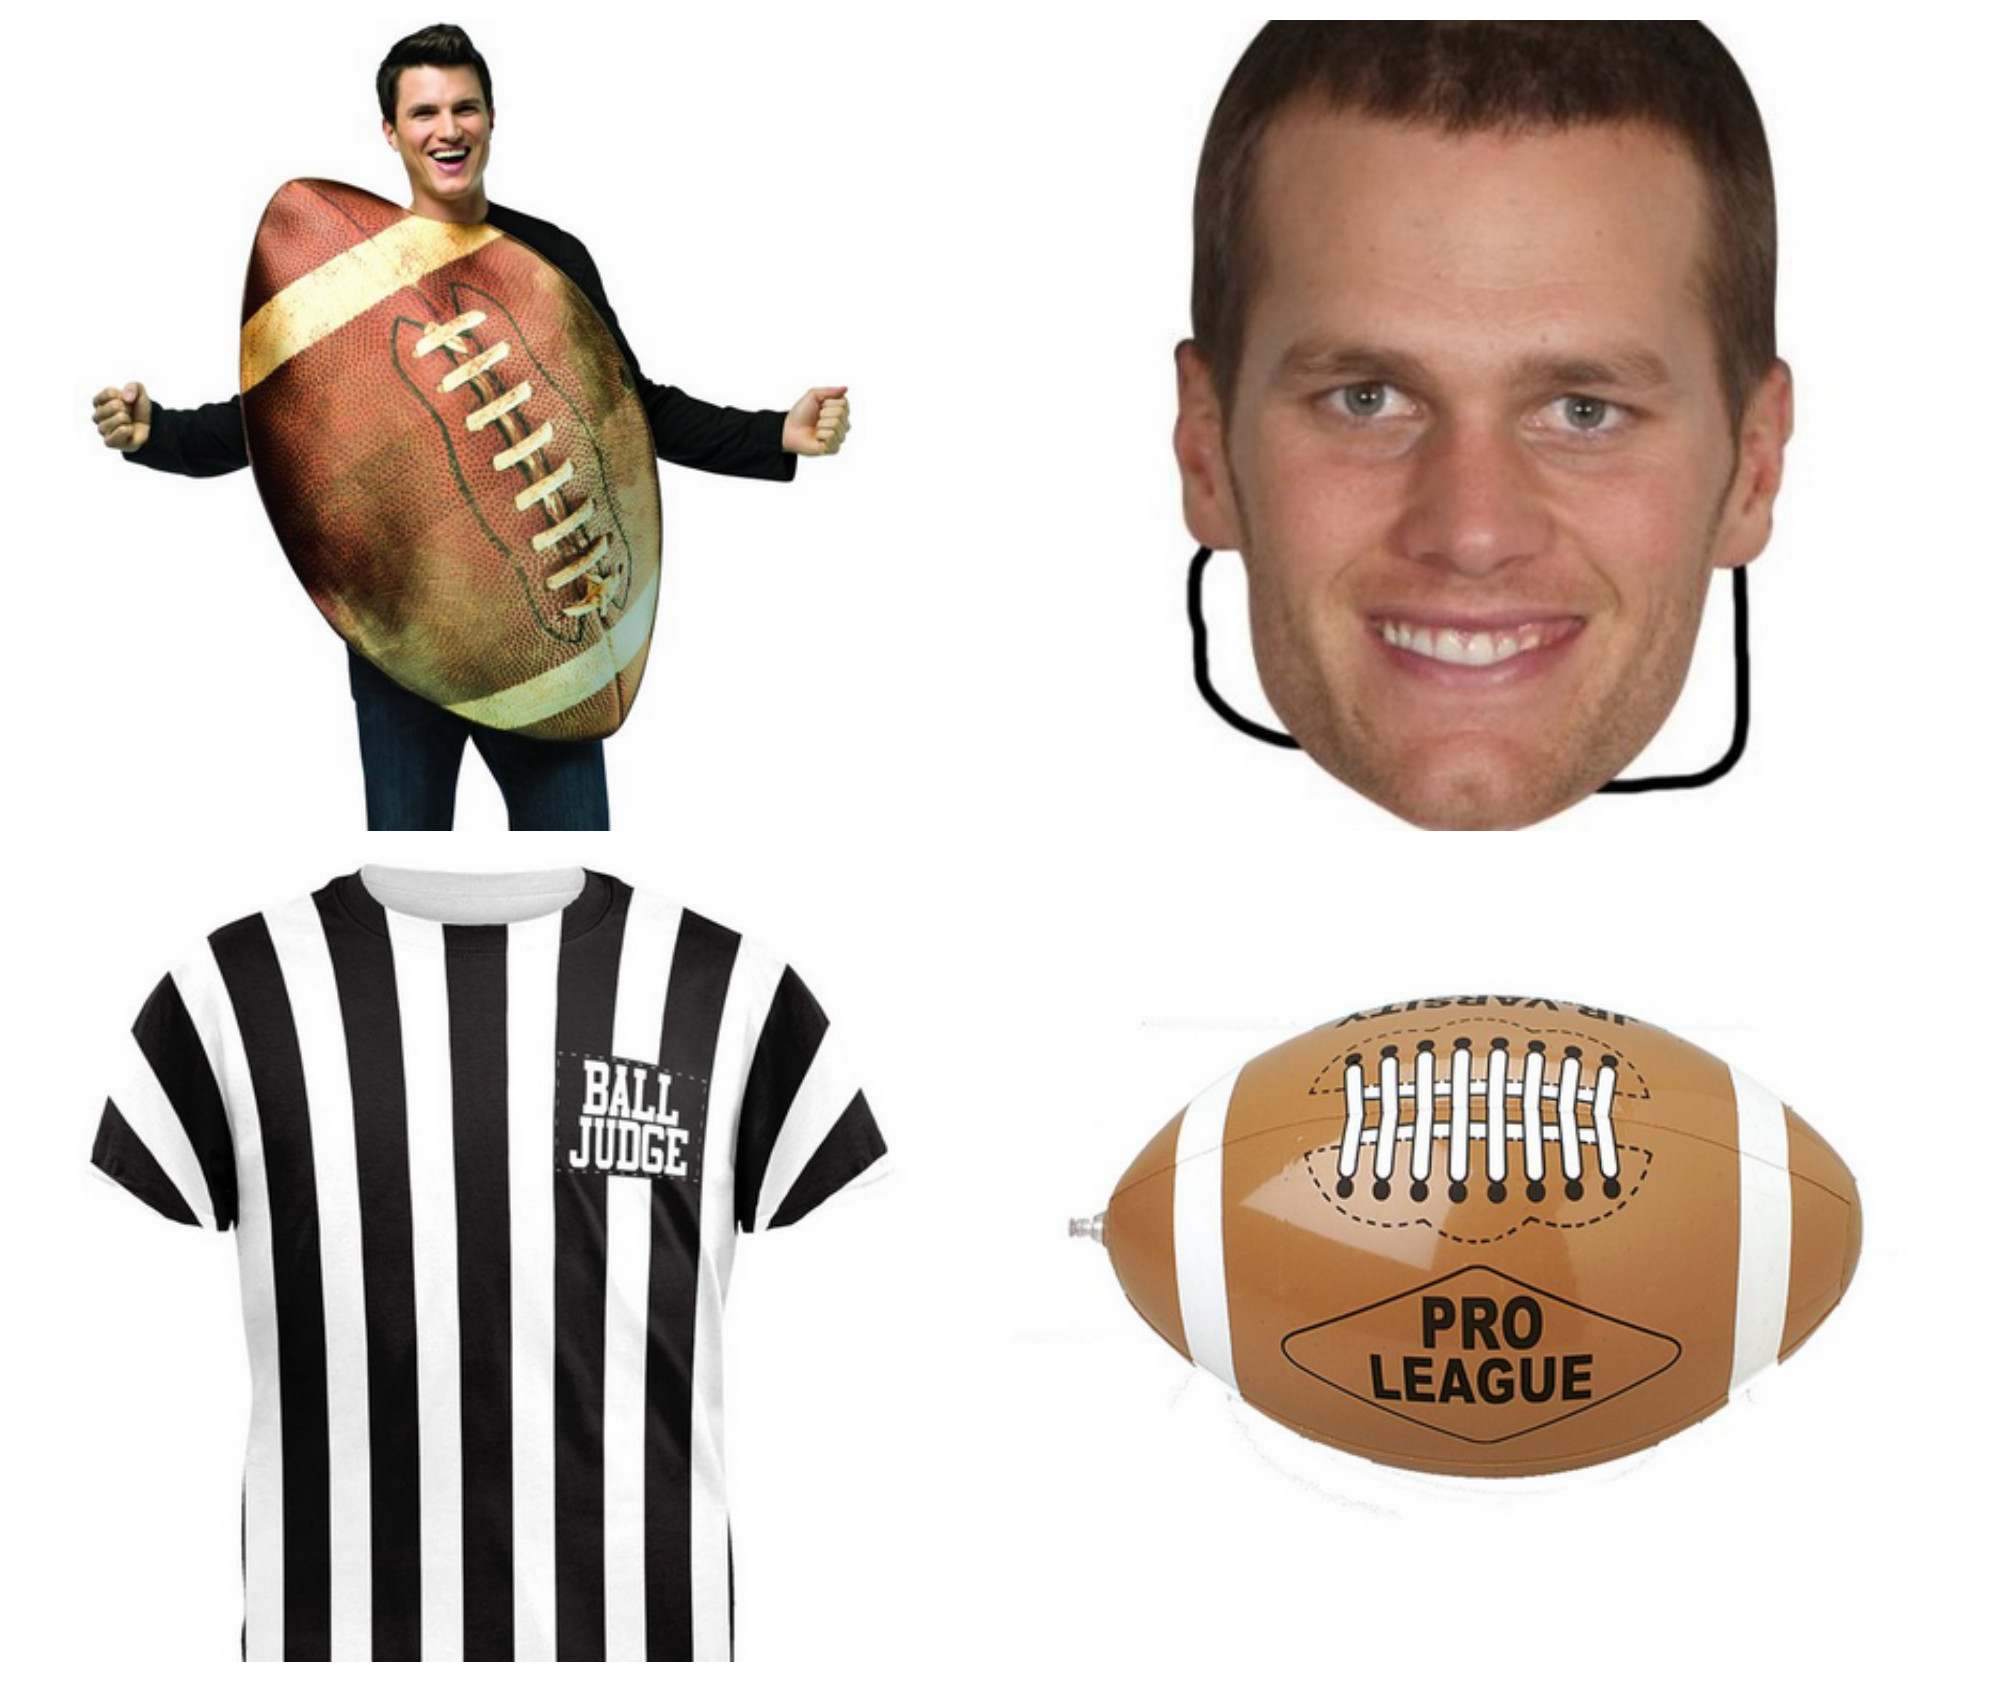 Deflate Gate Halloween Costume
 The 10 best Halloween costumes inspired by pop culture